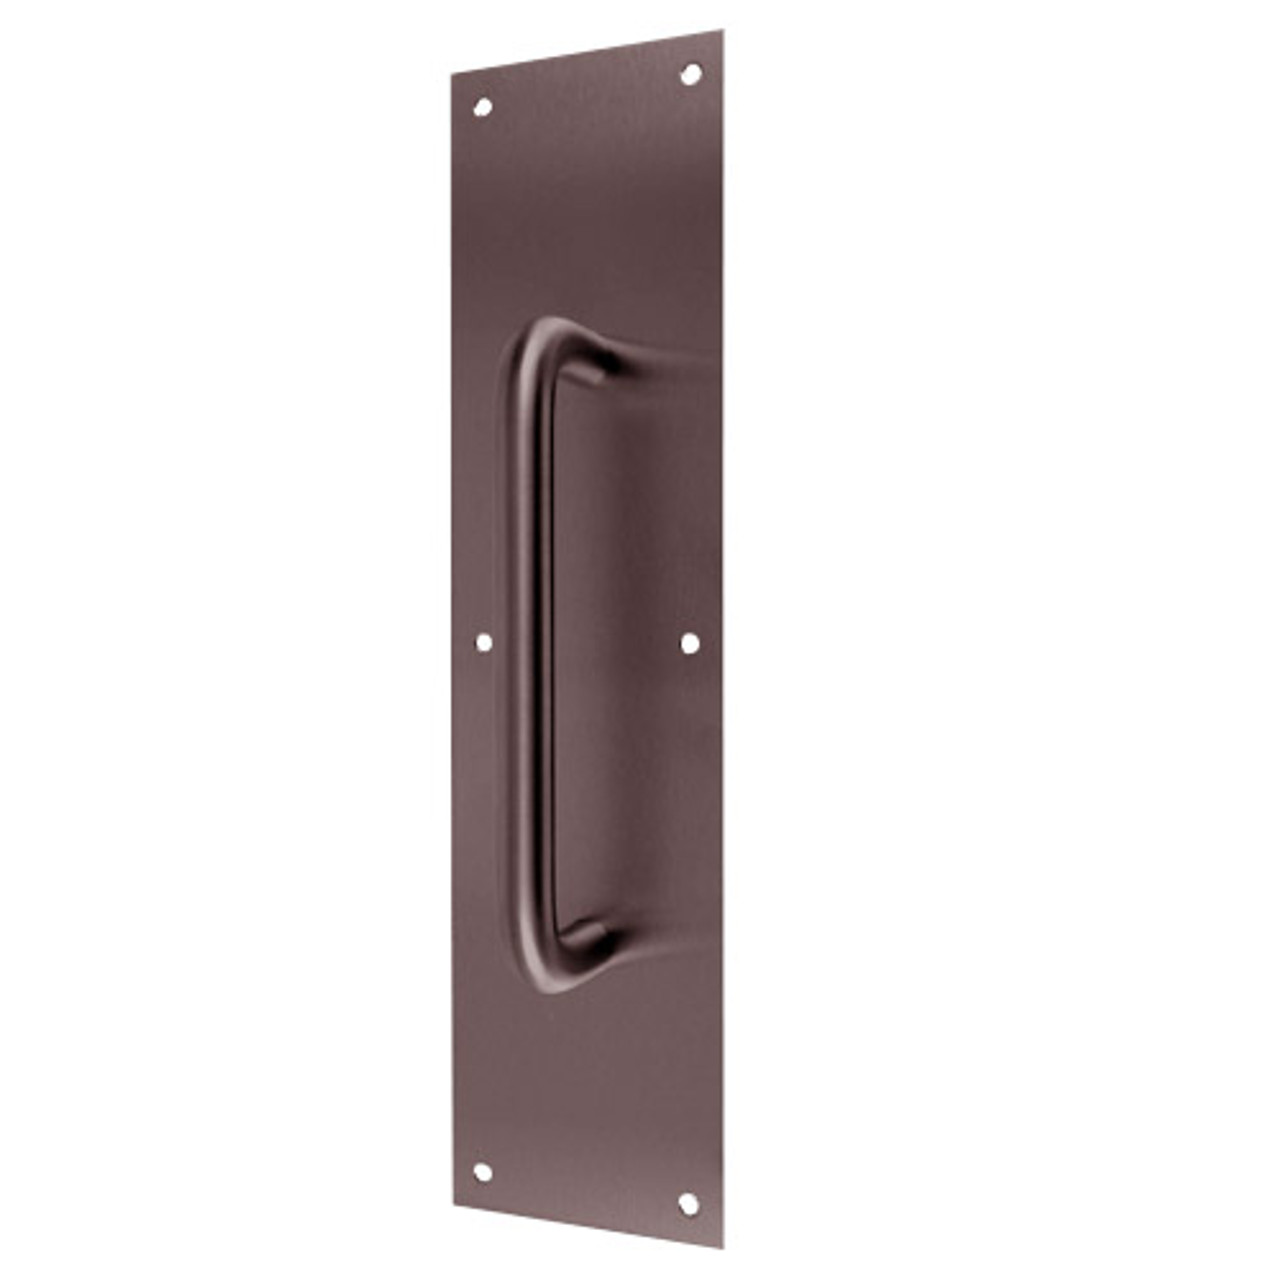 7111-613 Don Jo Pull Plates with 3/4" Round Pulls in Oil Rubbed Bronze Finish